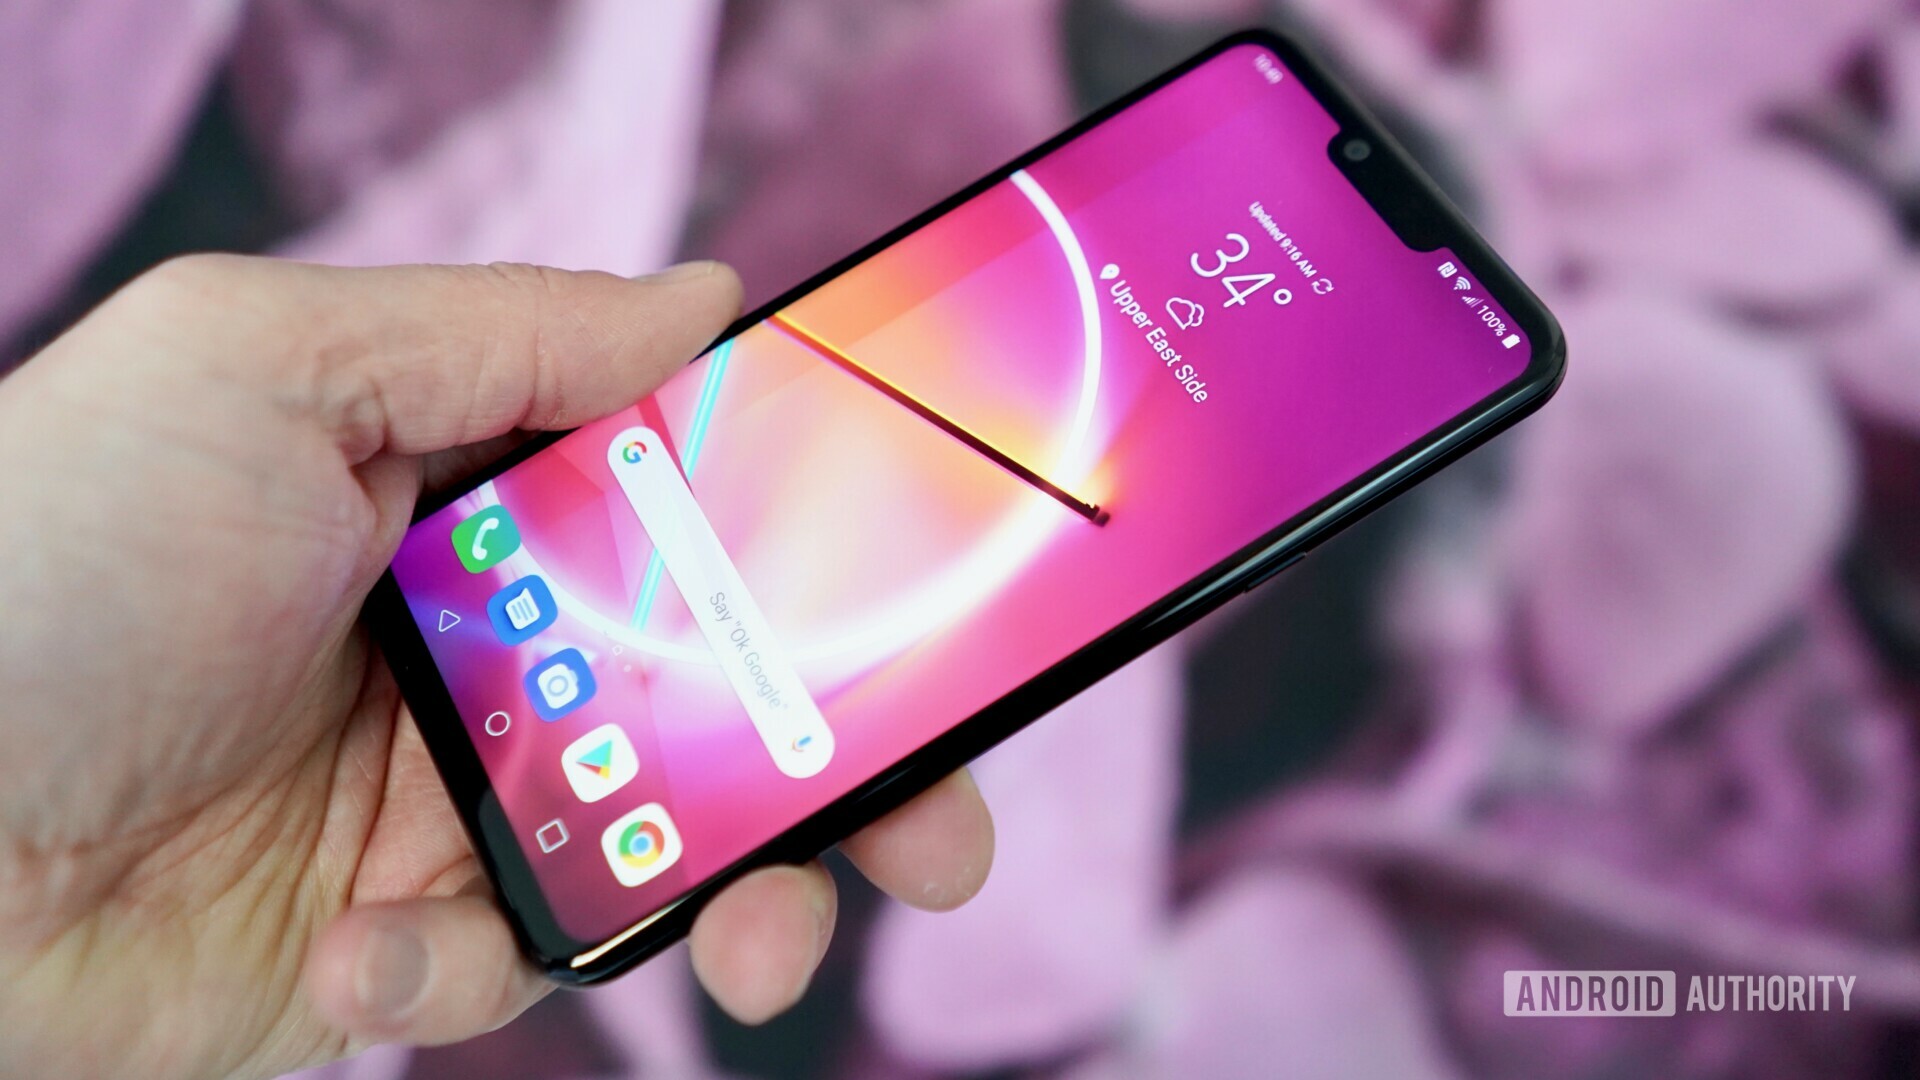 LG G8 ThinQ held in a hand at the MWC 2019 presentation.